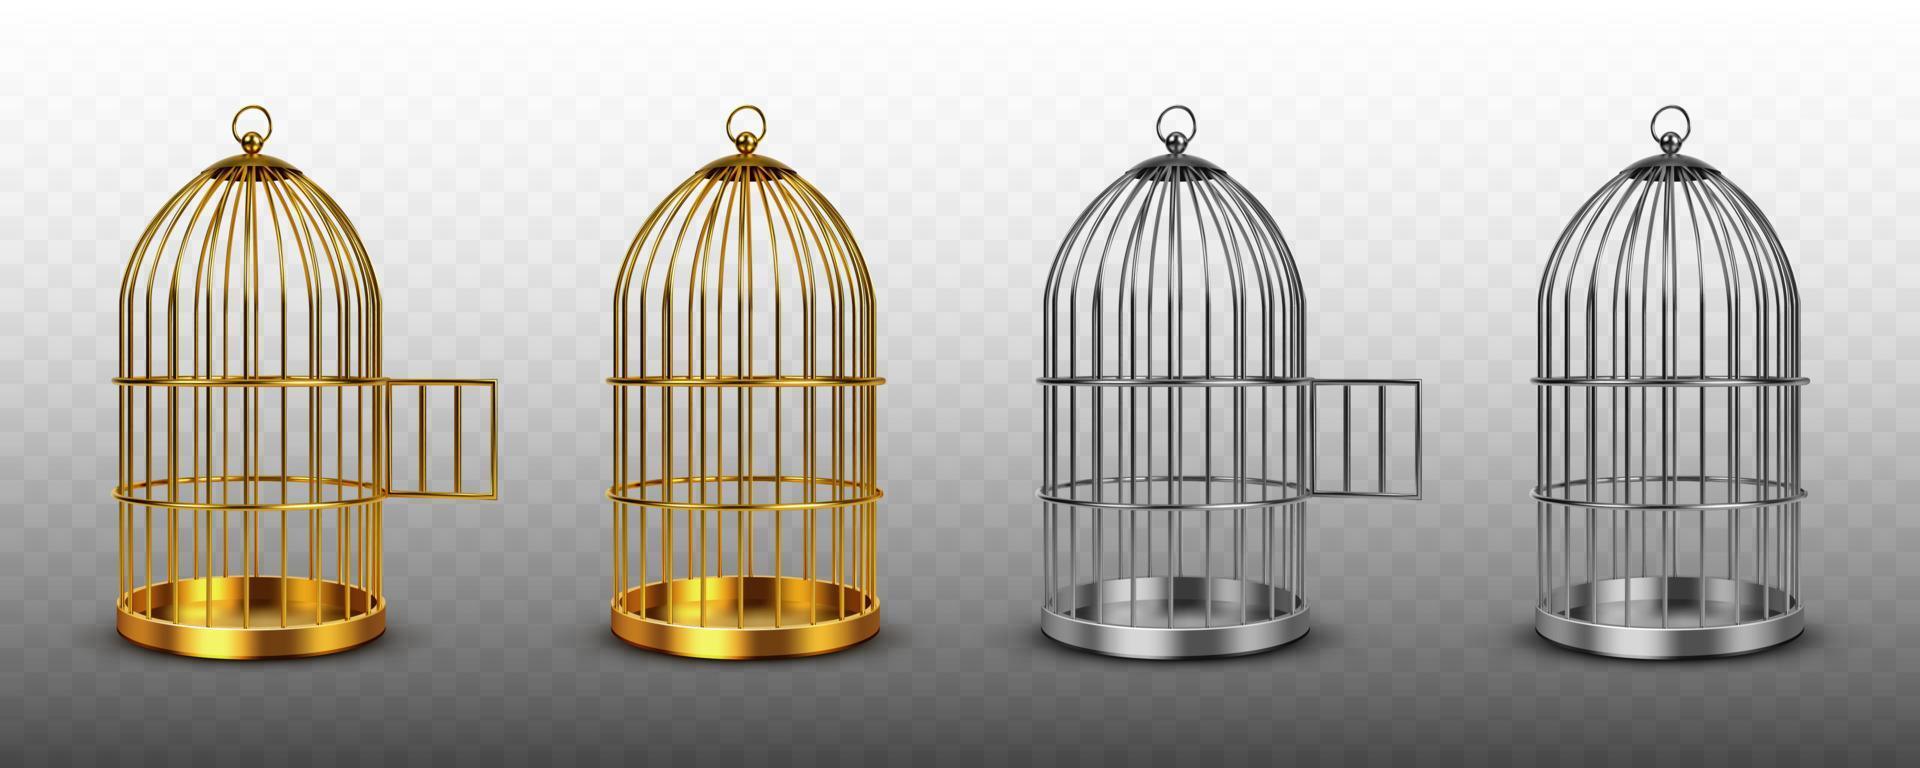 Bird cages, vintage empty birdcages isolated set vector